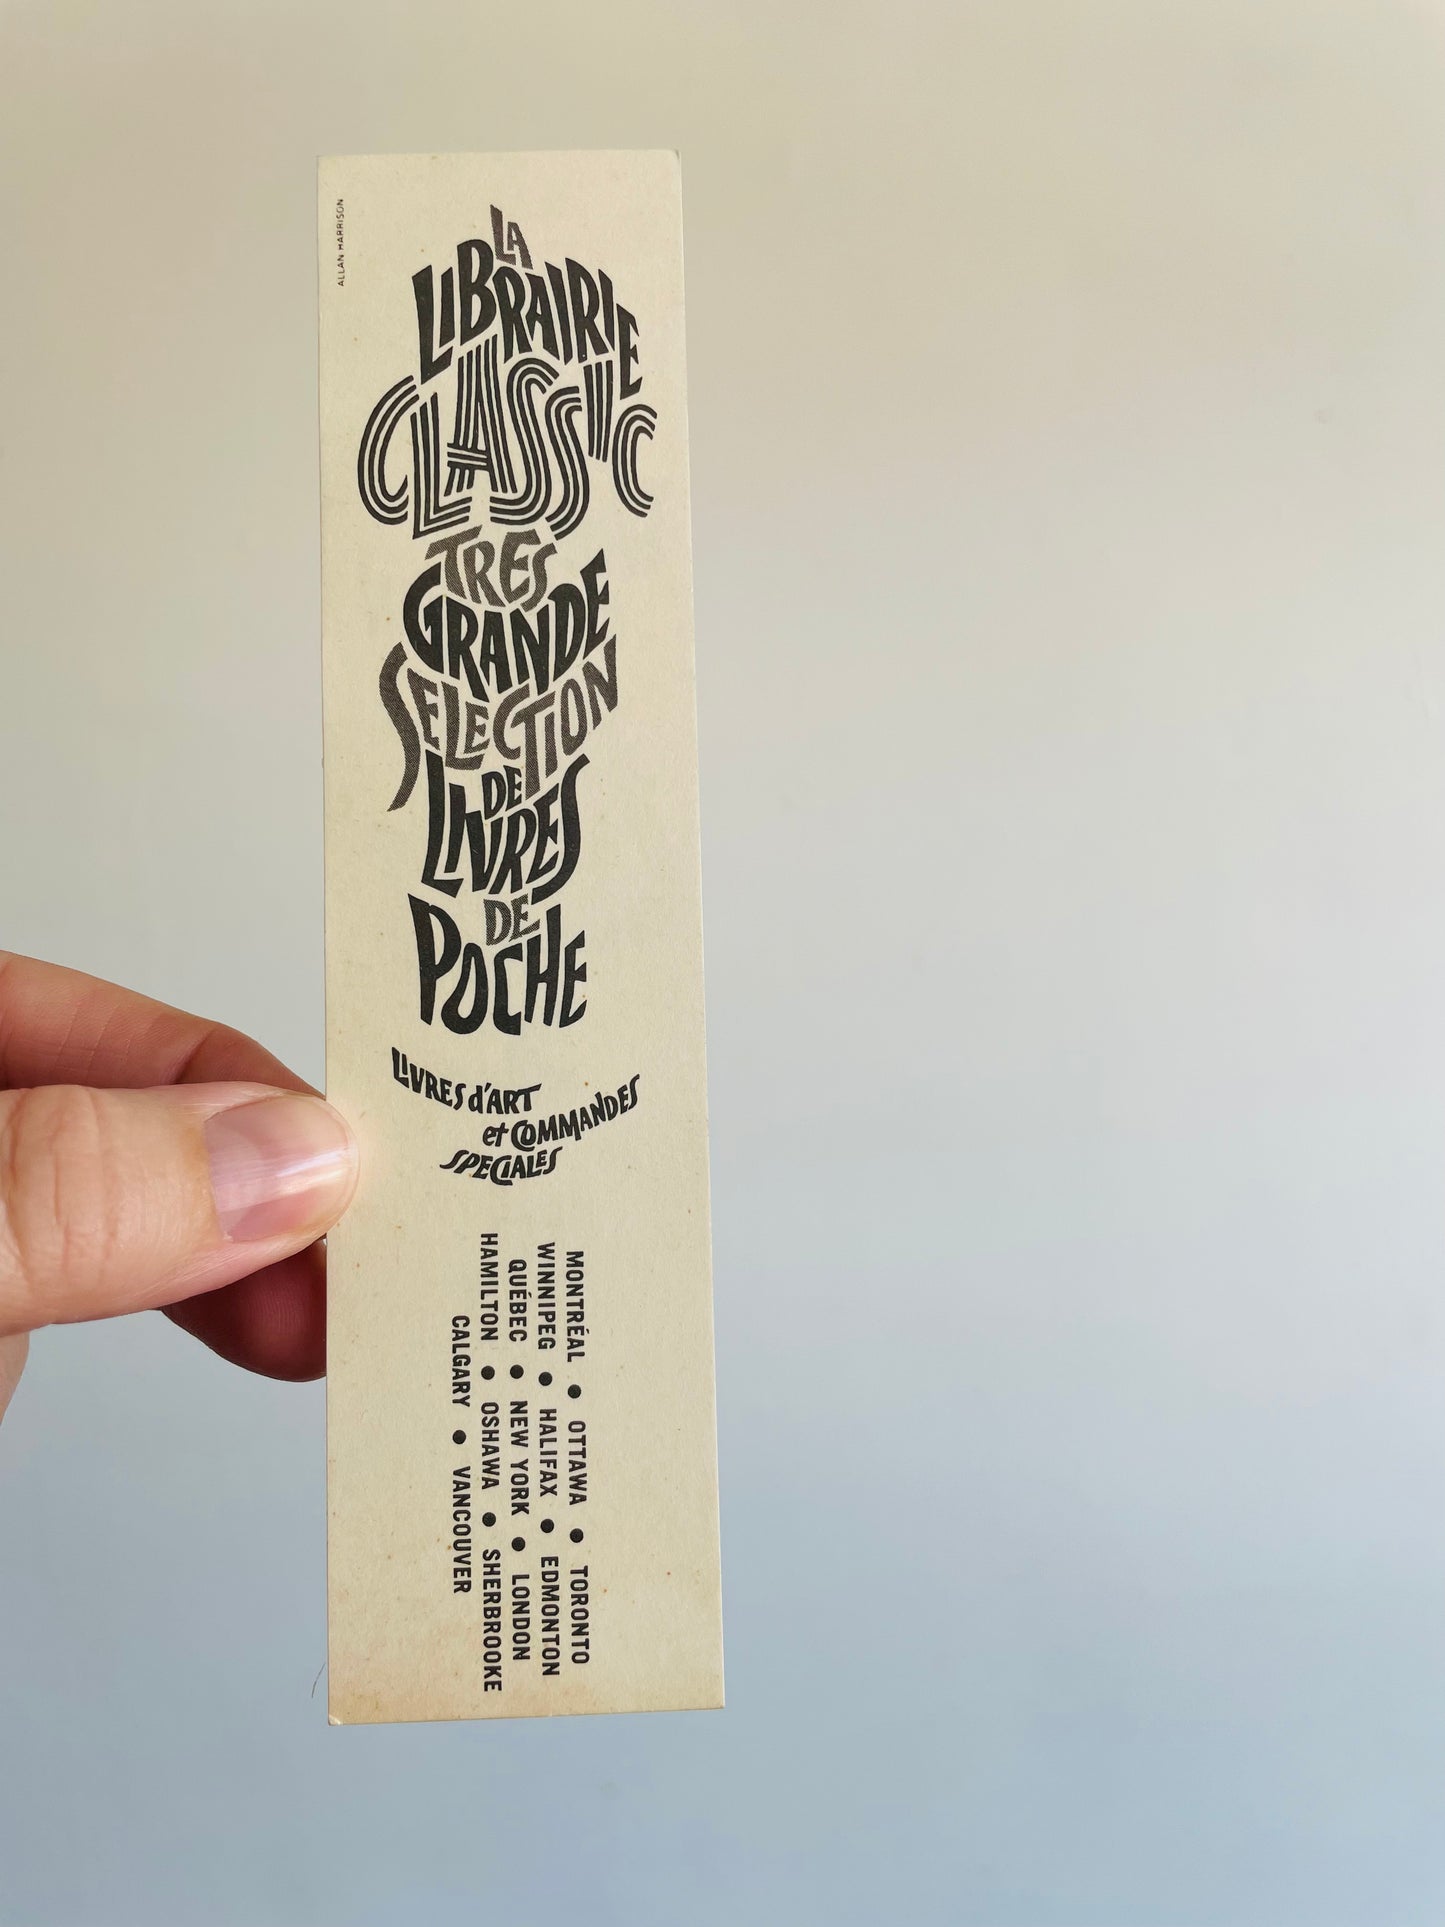 Vintage Bookmark - The Classic Bookshops - Double-Sided: English & French